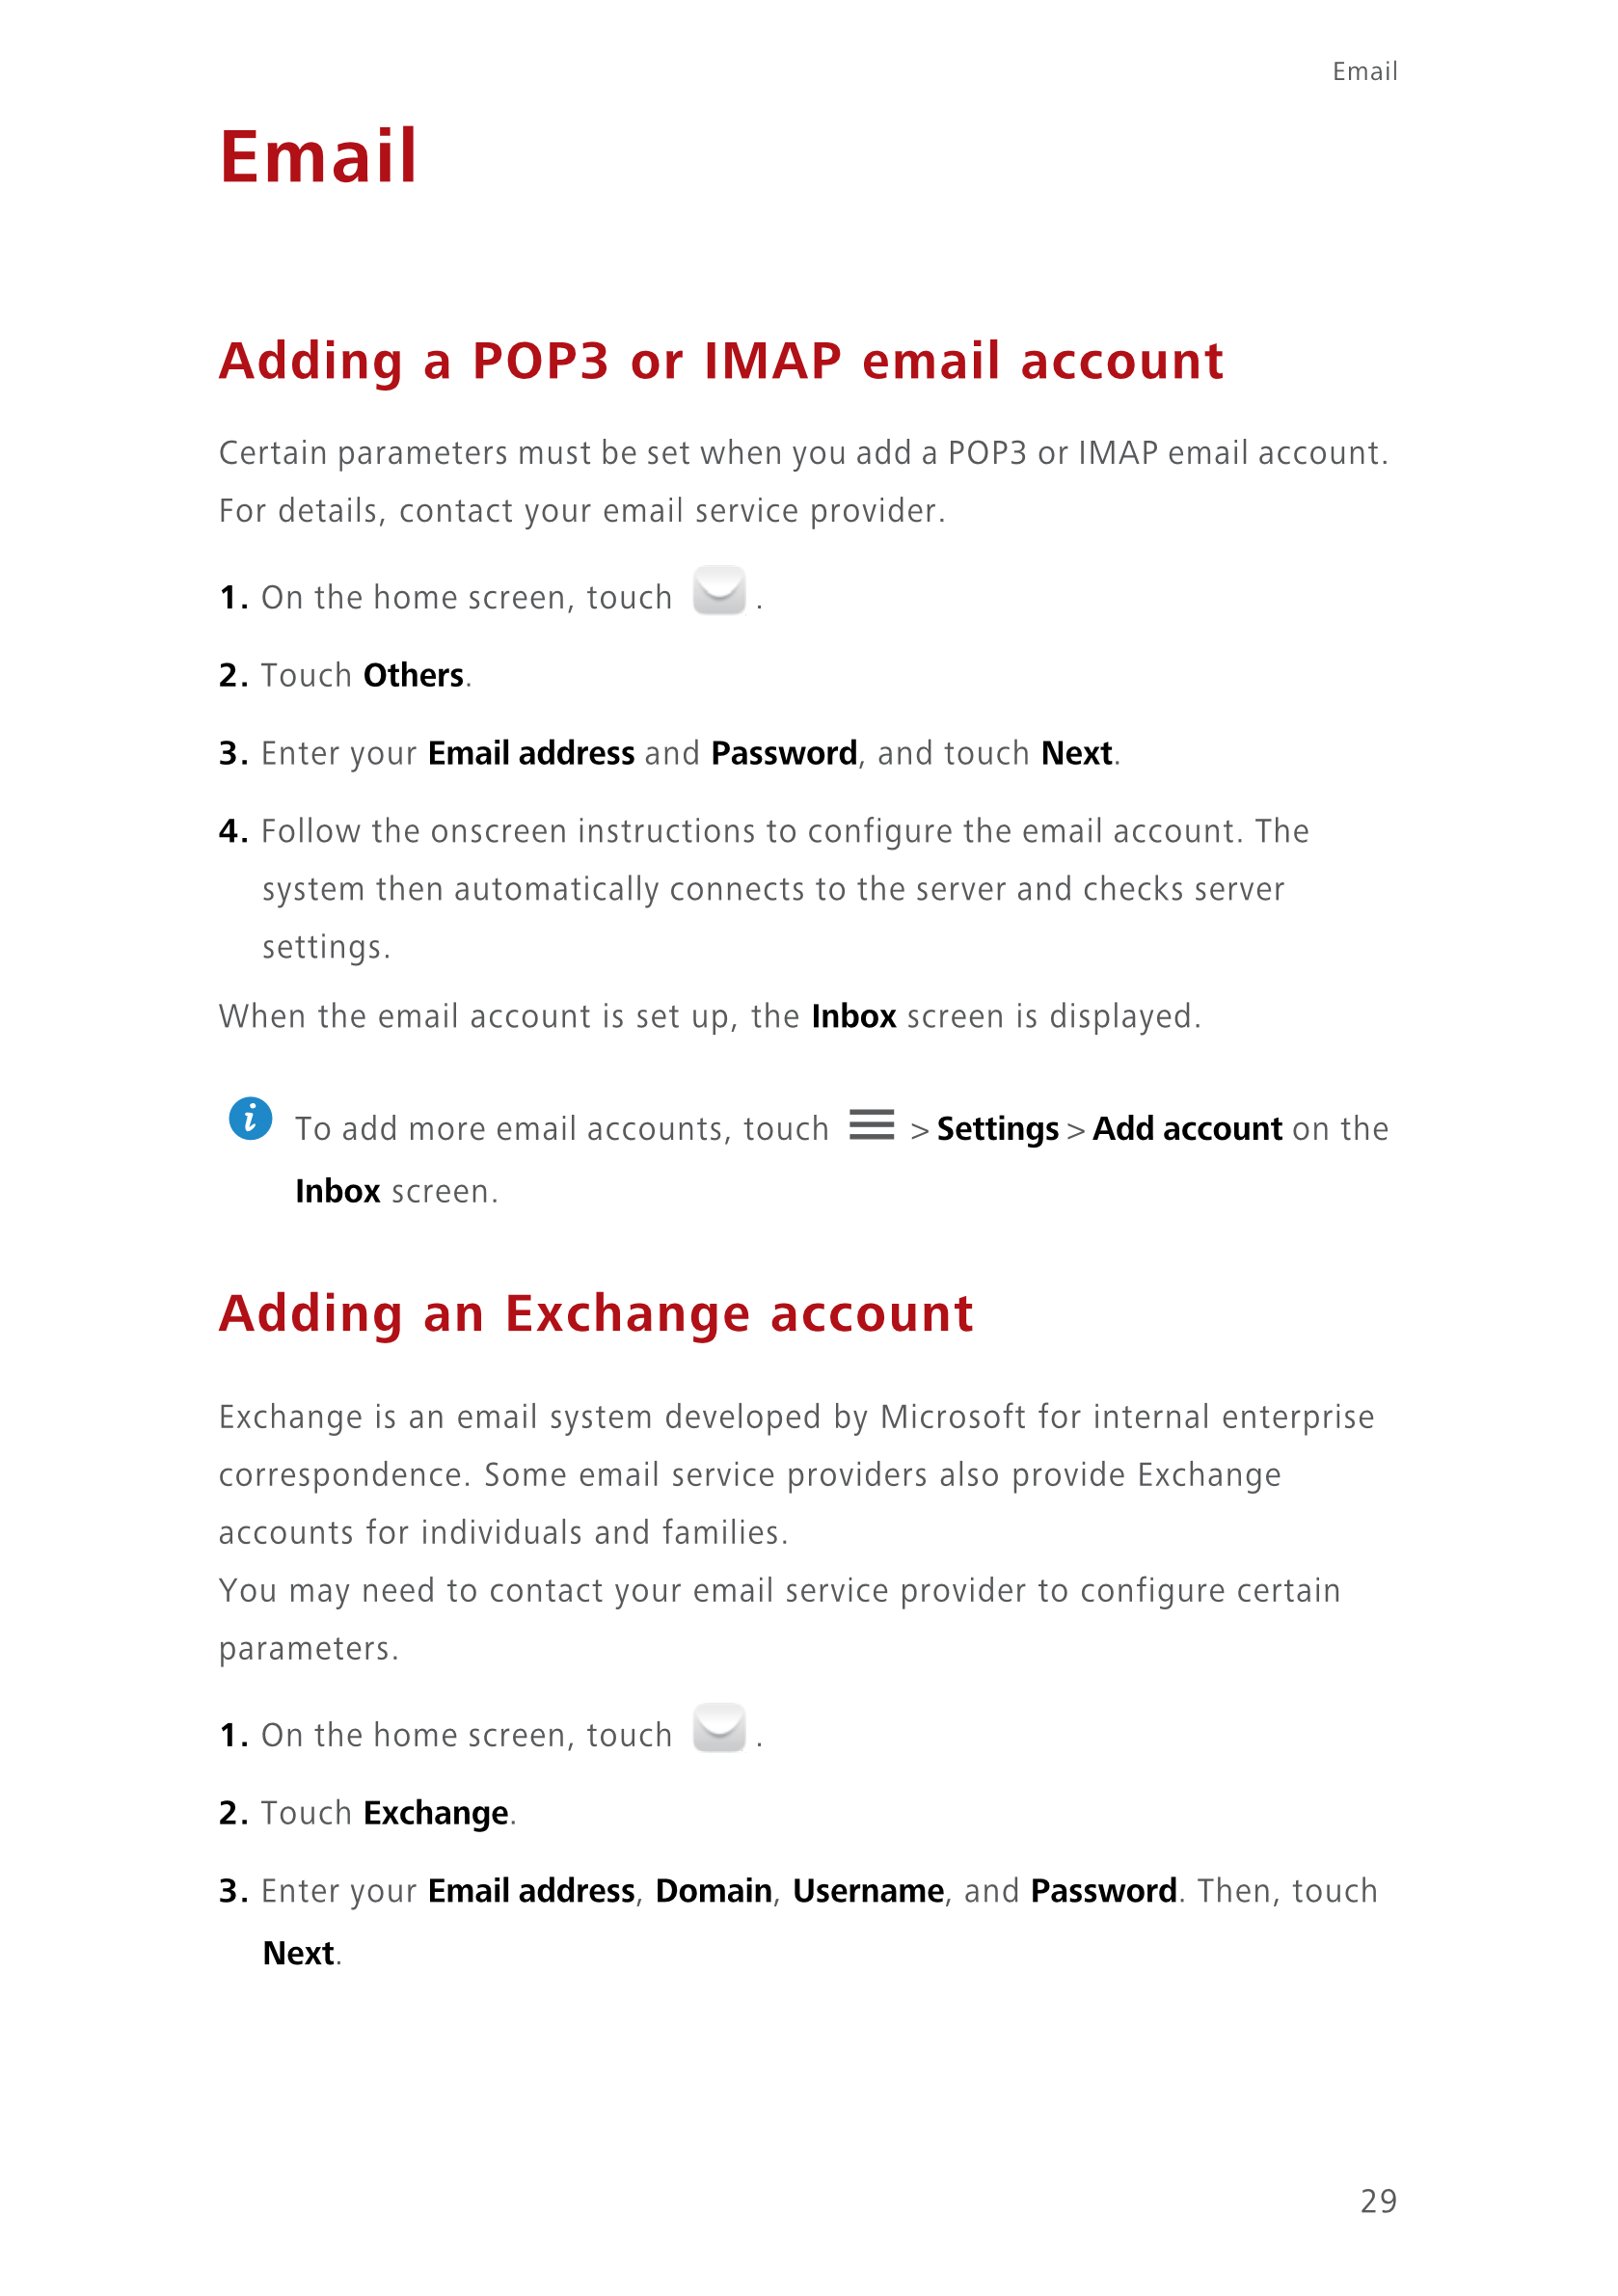 Email
Email
Adding a POP3 or IMAP email account
Certain parameters must be set when you add a POP3 or IMAP email account. 
For d